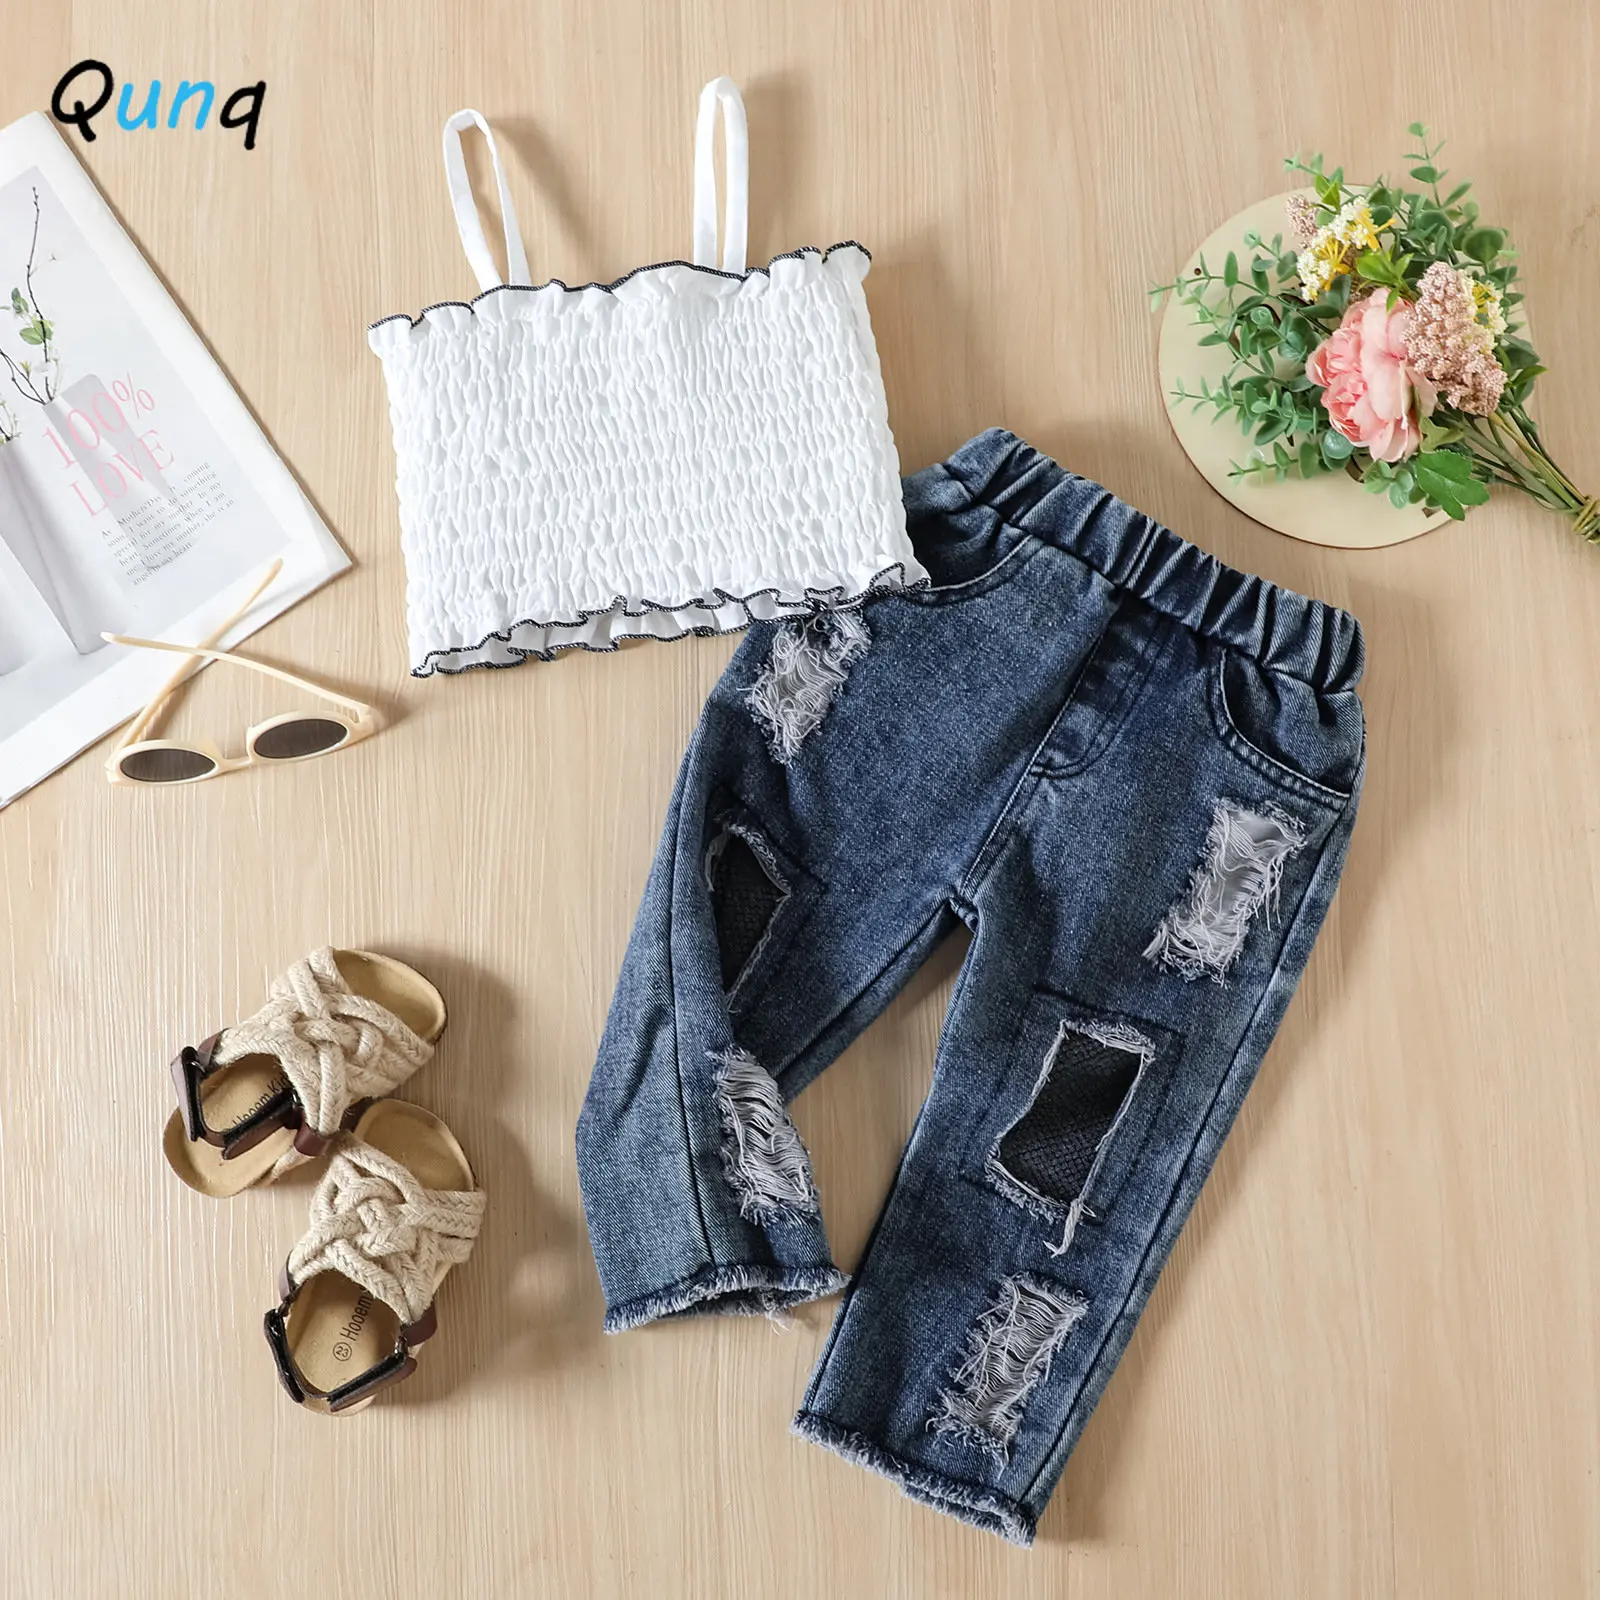 

Qunq 2023 Summer New Girls Lovely Sleeveless Halter Vest Top + Ripped Denim Trousers 2 Pieces Set Casual Kids Clothes Age 3T-8T